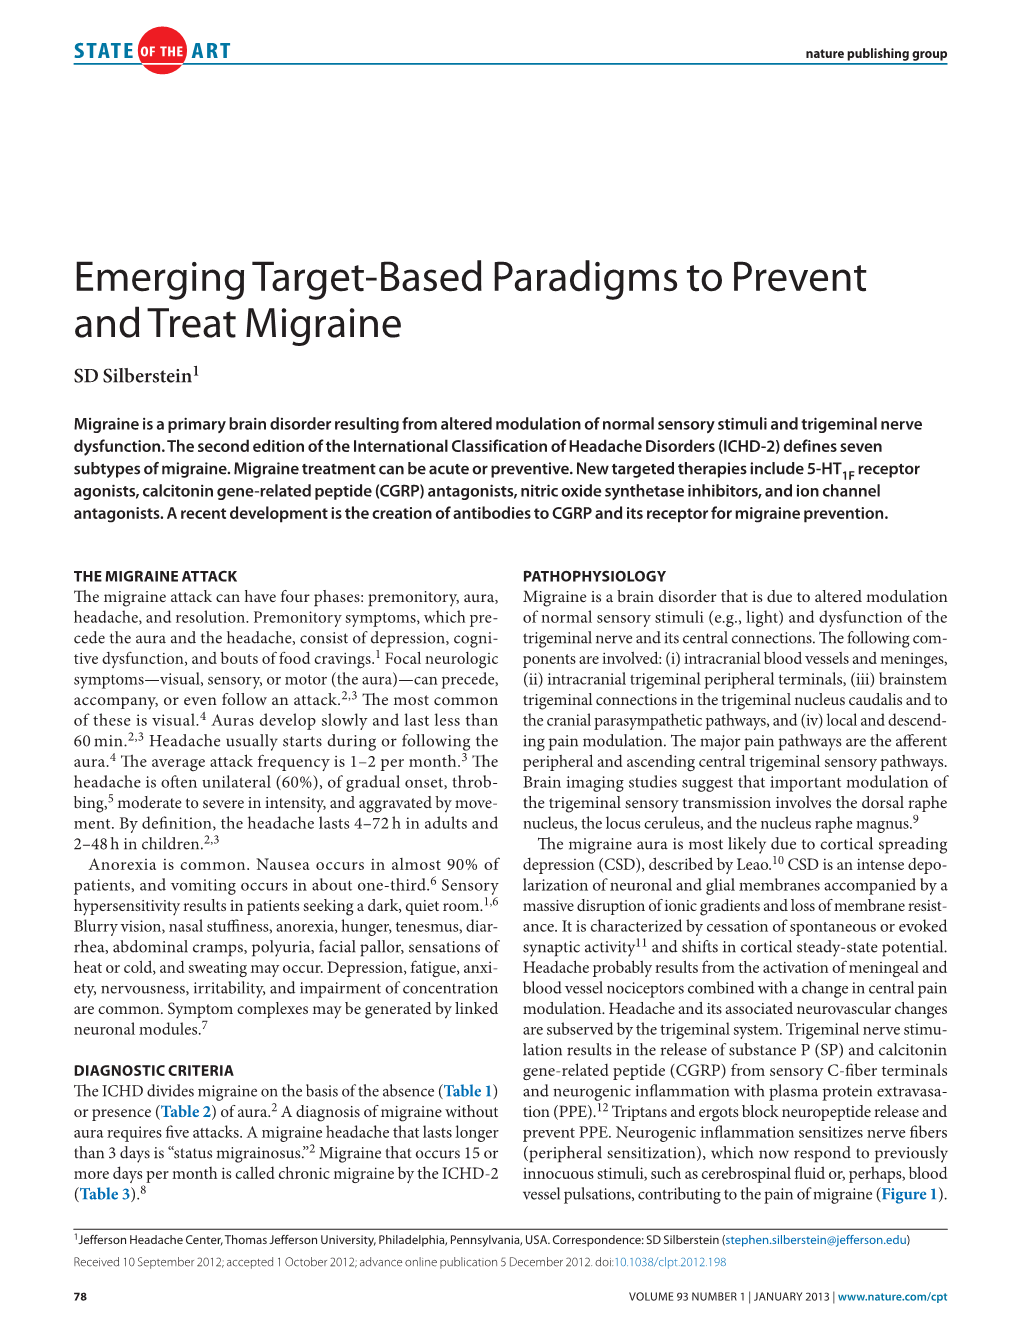 Emerging Target-Based Paradigms to Prevent and Treat Migraine